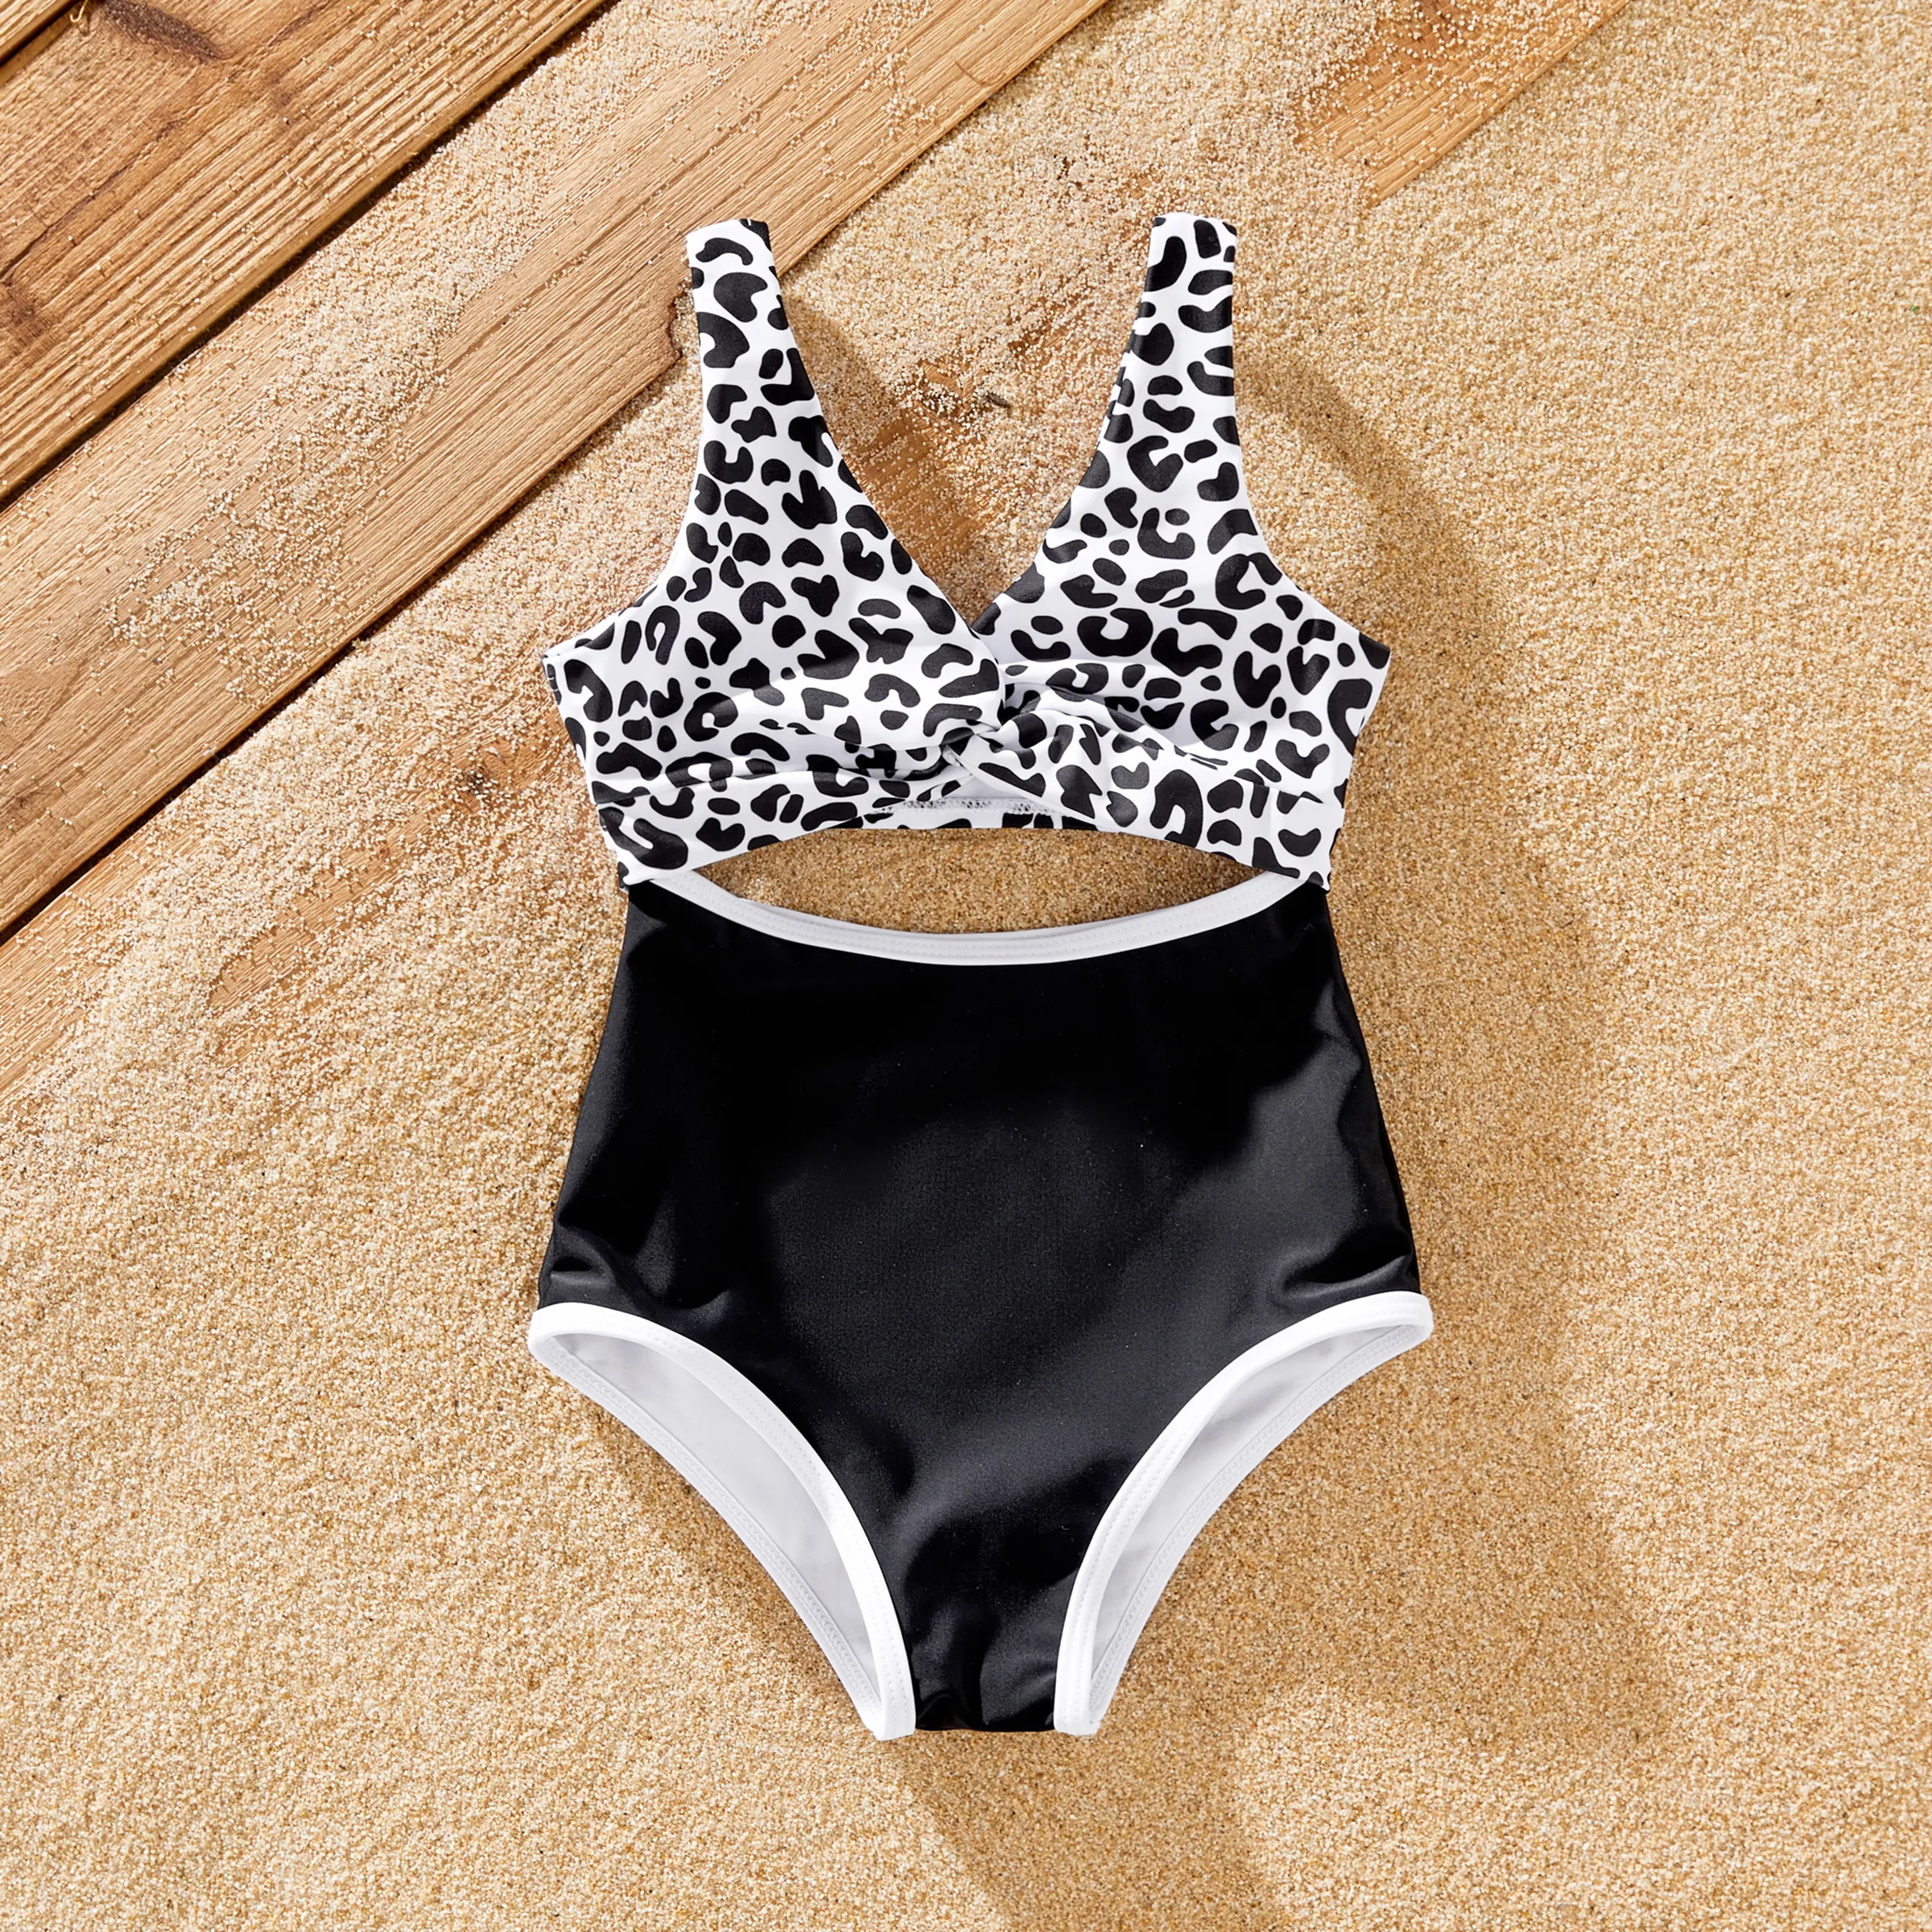 Family Matching Leopard Printed Swim Trunks or Twist Knot High-Waist Swimsuit